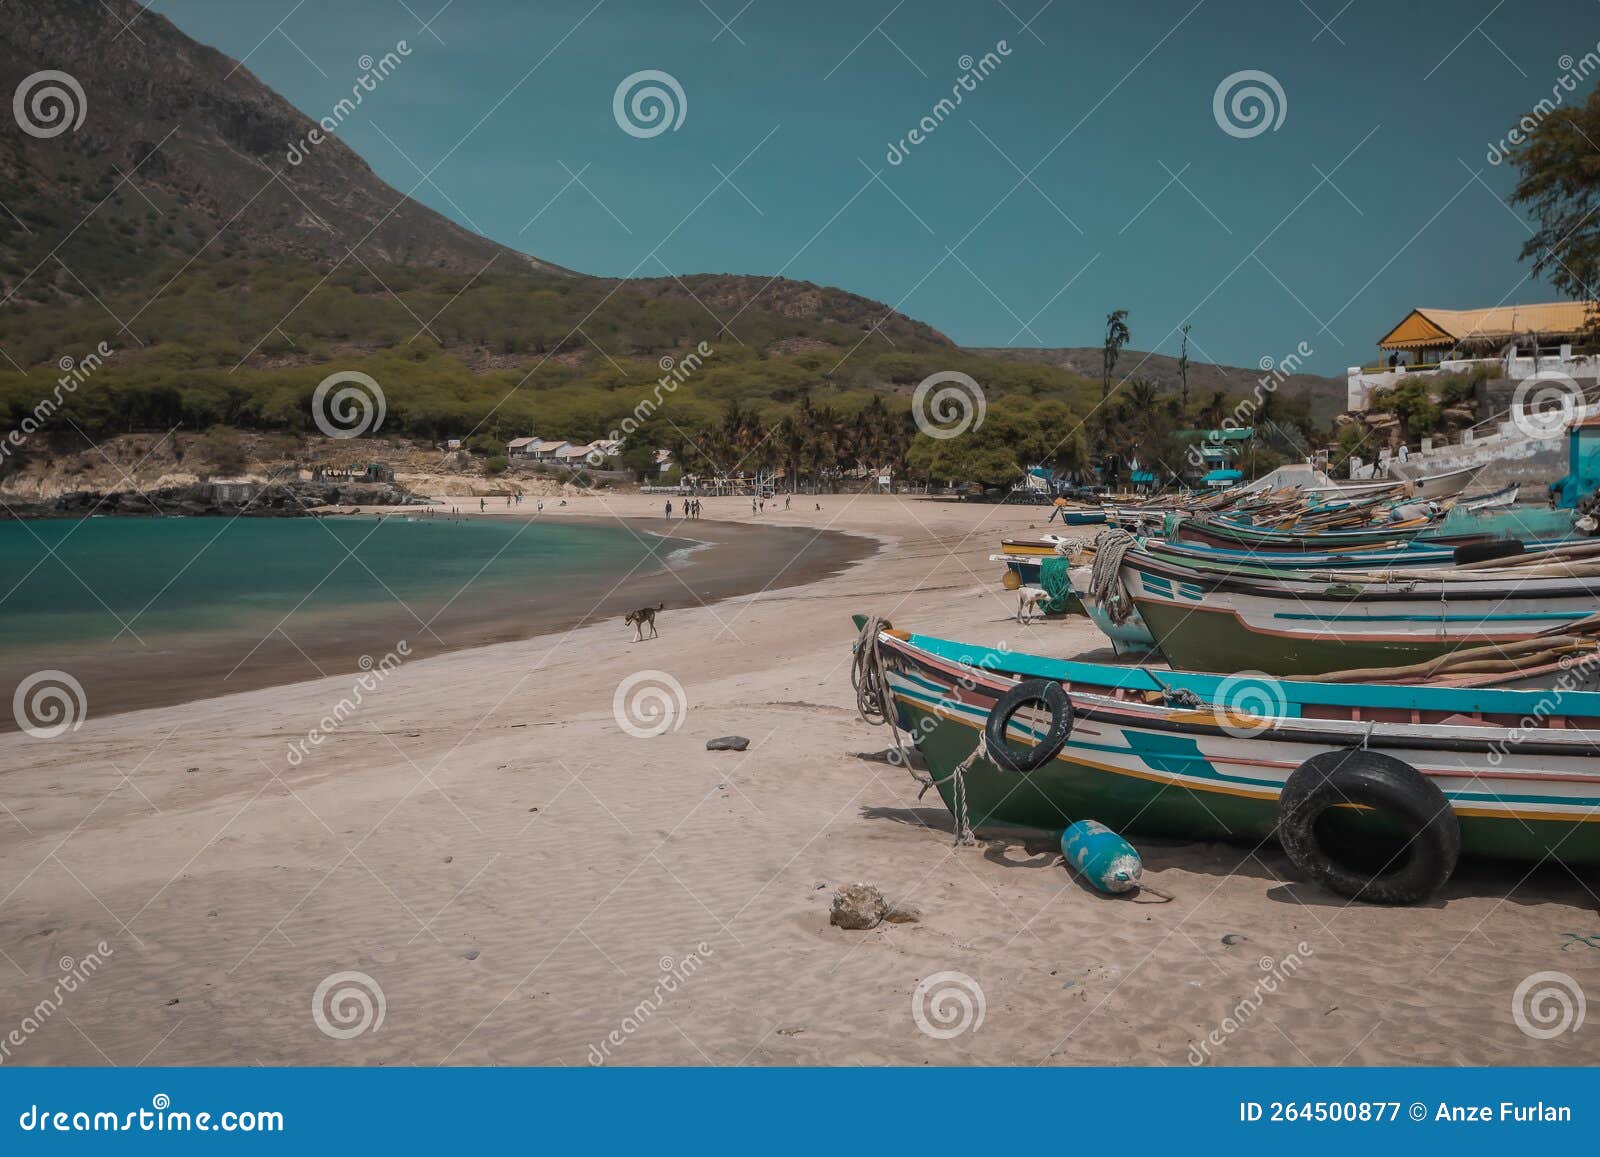 colorful wooden boats on a beach on the island of santiago on cabo verde islands, with some trees and houses in the background